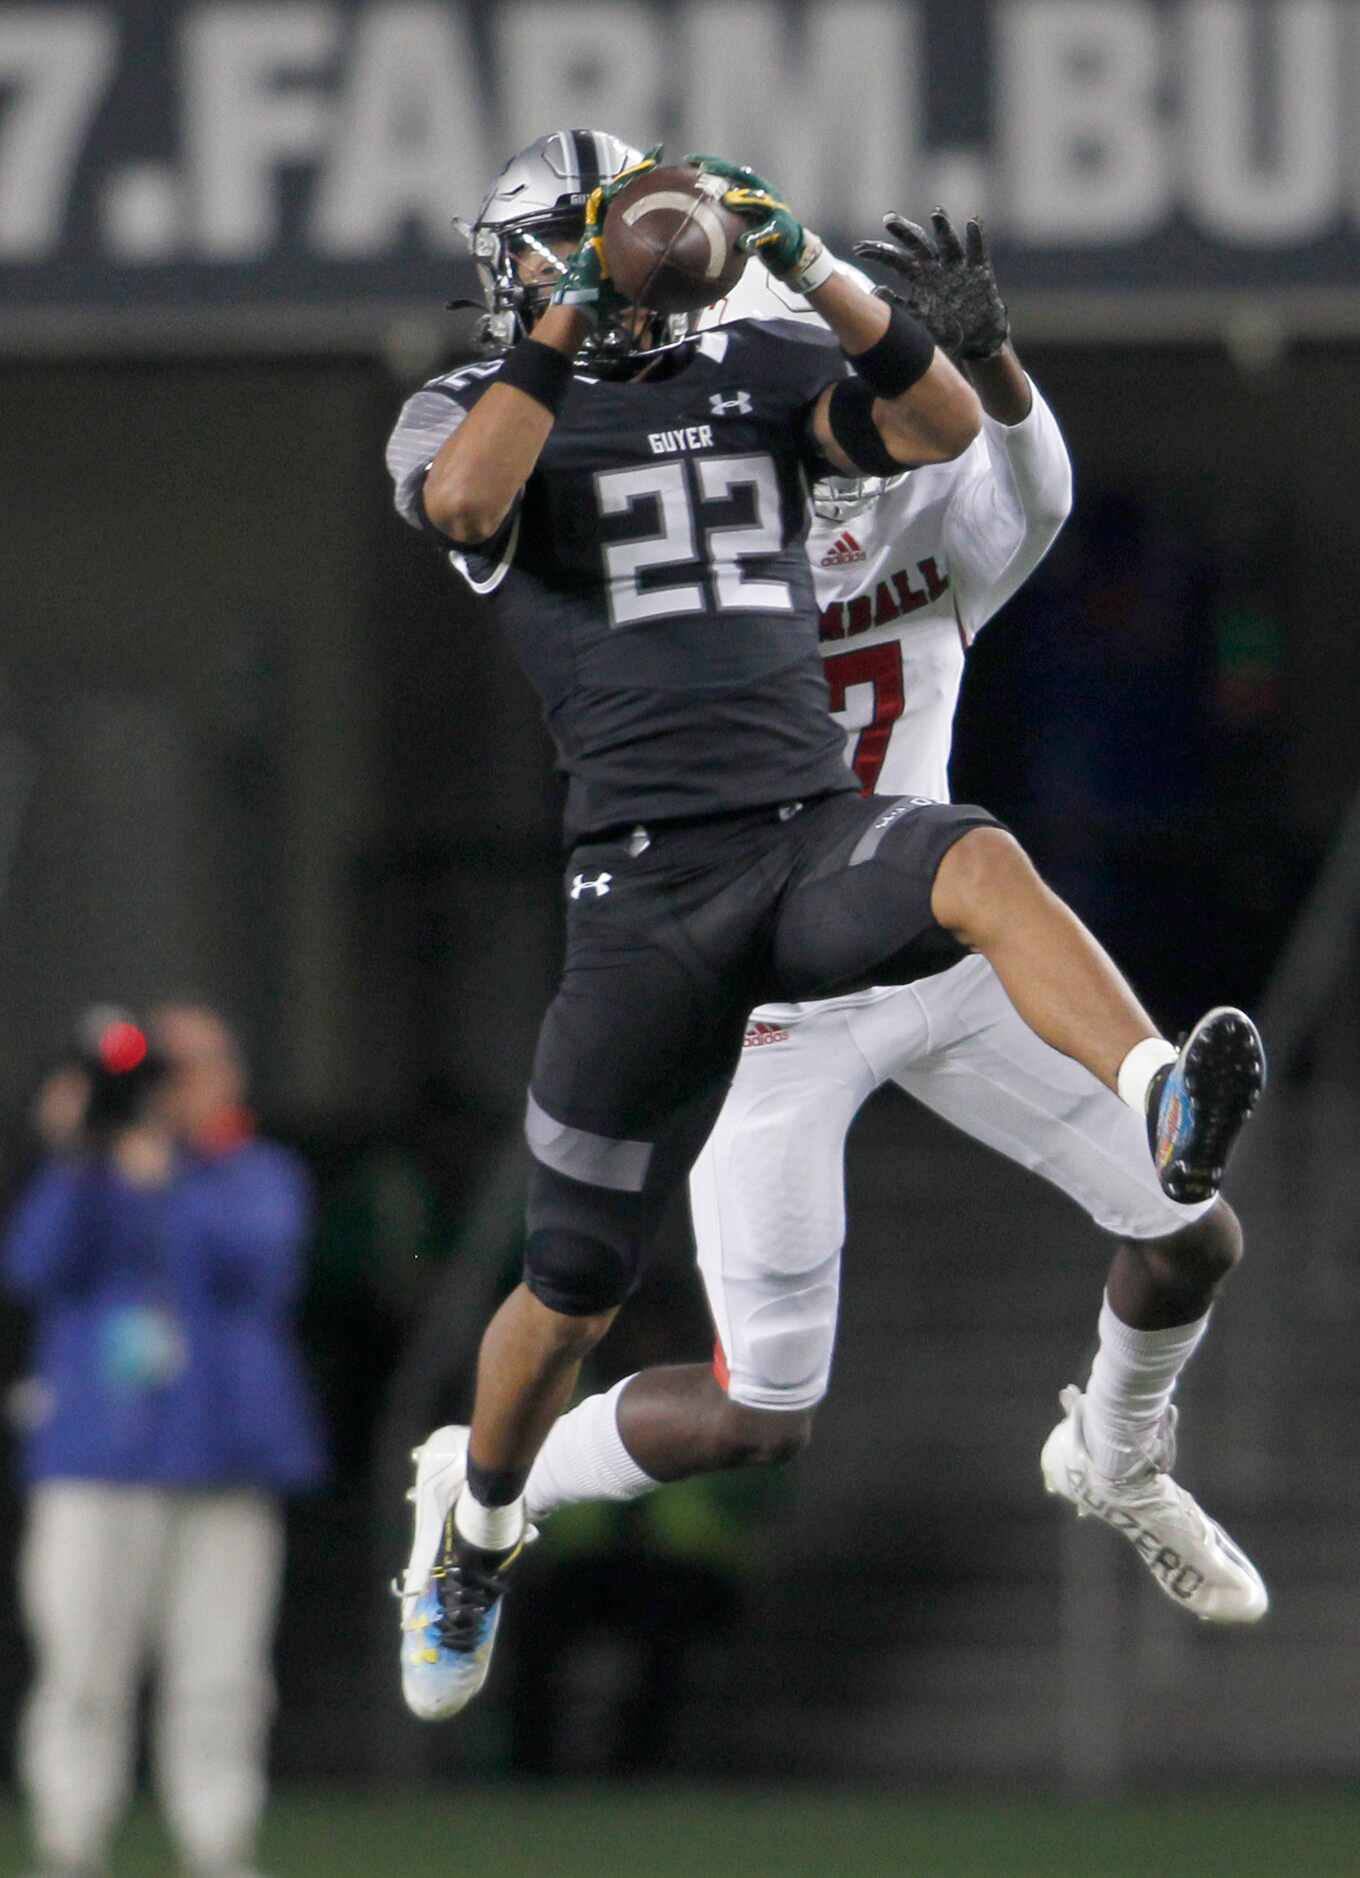 Denton Guyer defensive back Peyton Bowen (22) leaps to intercept a pass intended for Tomball...